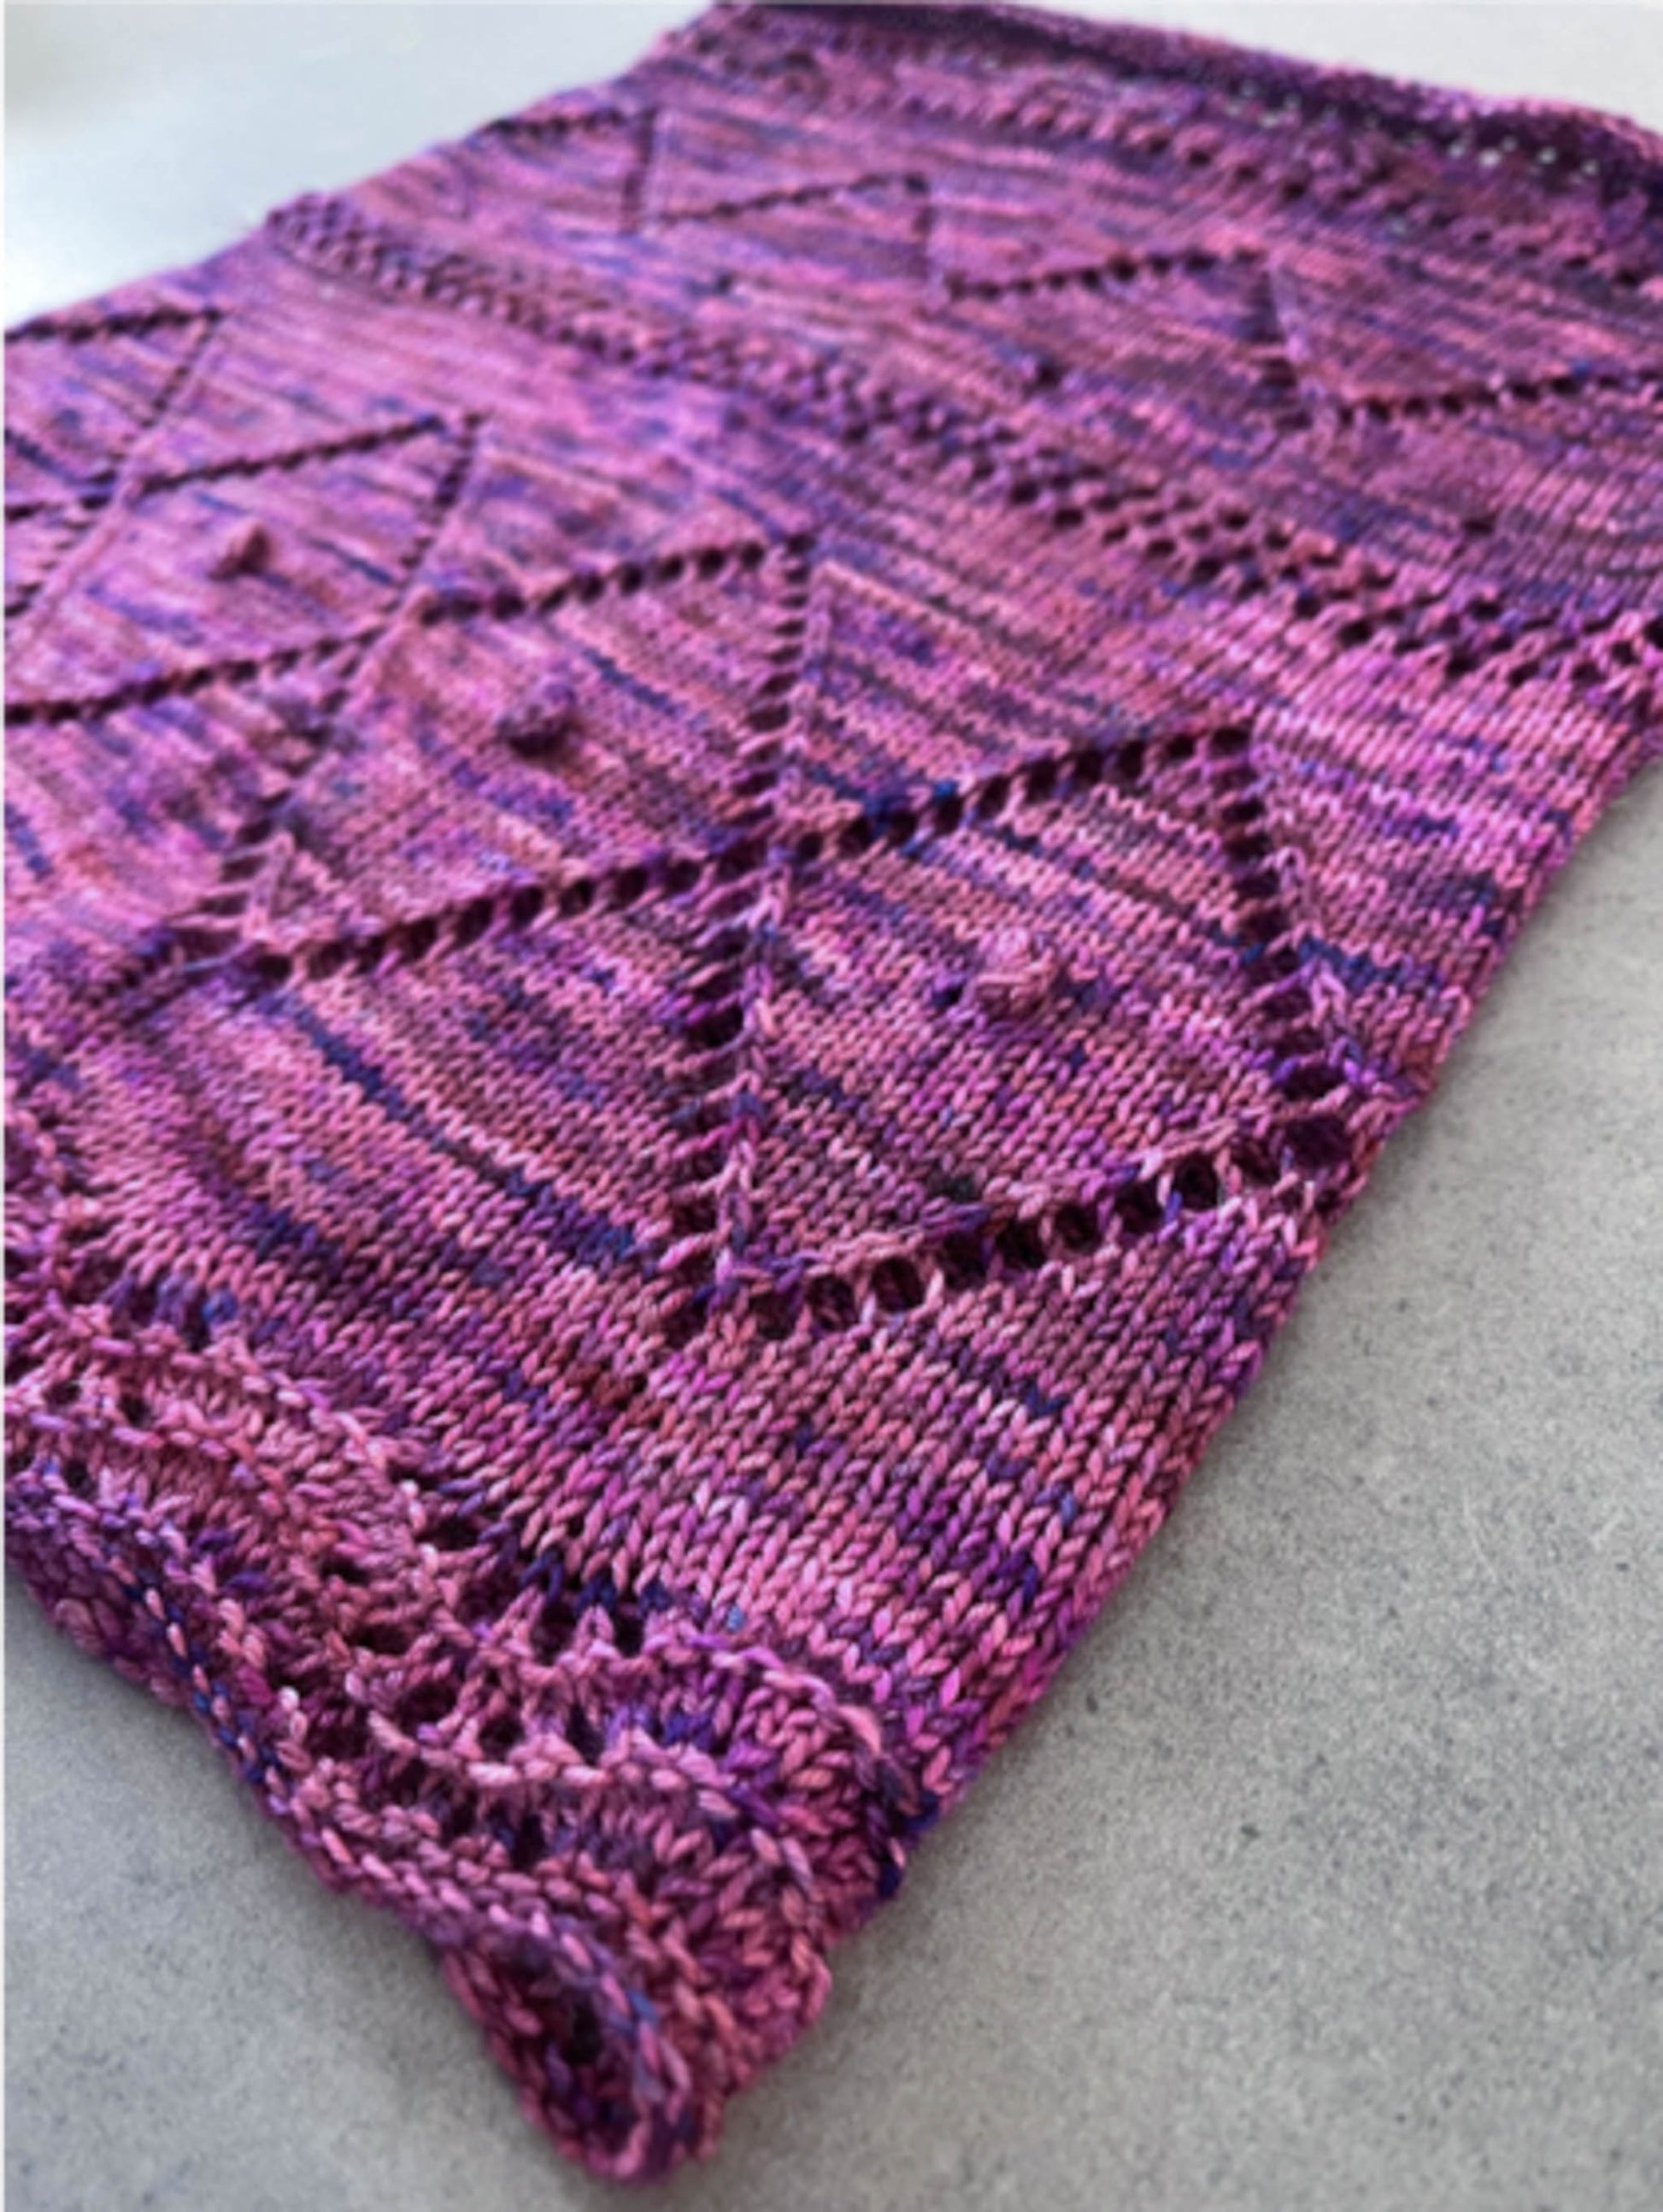 The Gillian knit cowl in Practical Magic colorway, a purple and pink variegated.